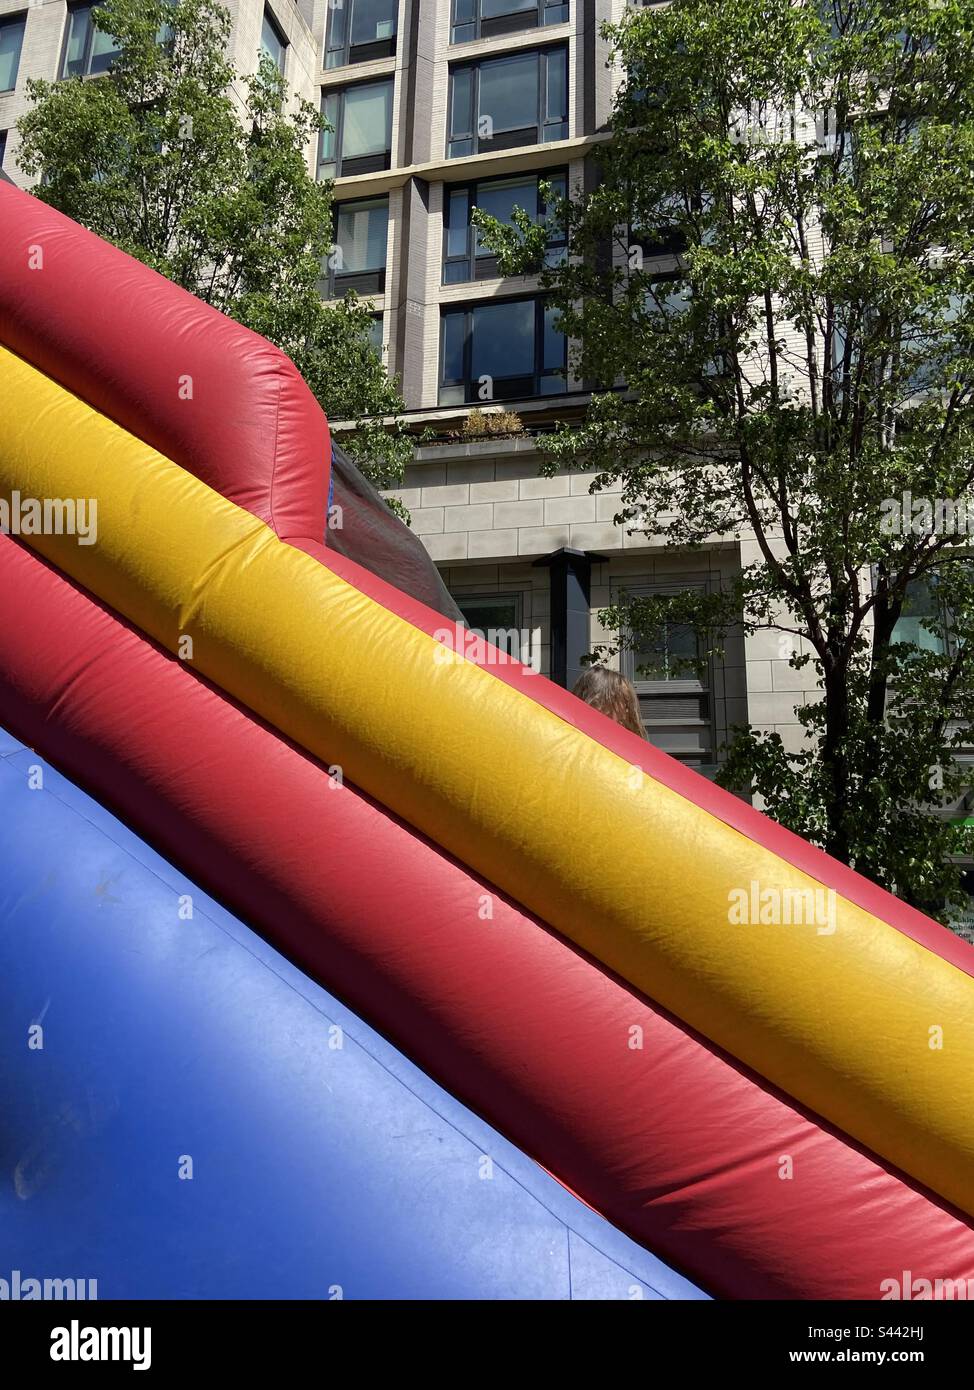 Blue red and yellow rubber slide on upper east side New York Stock Photo